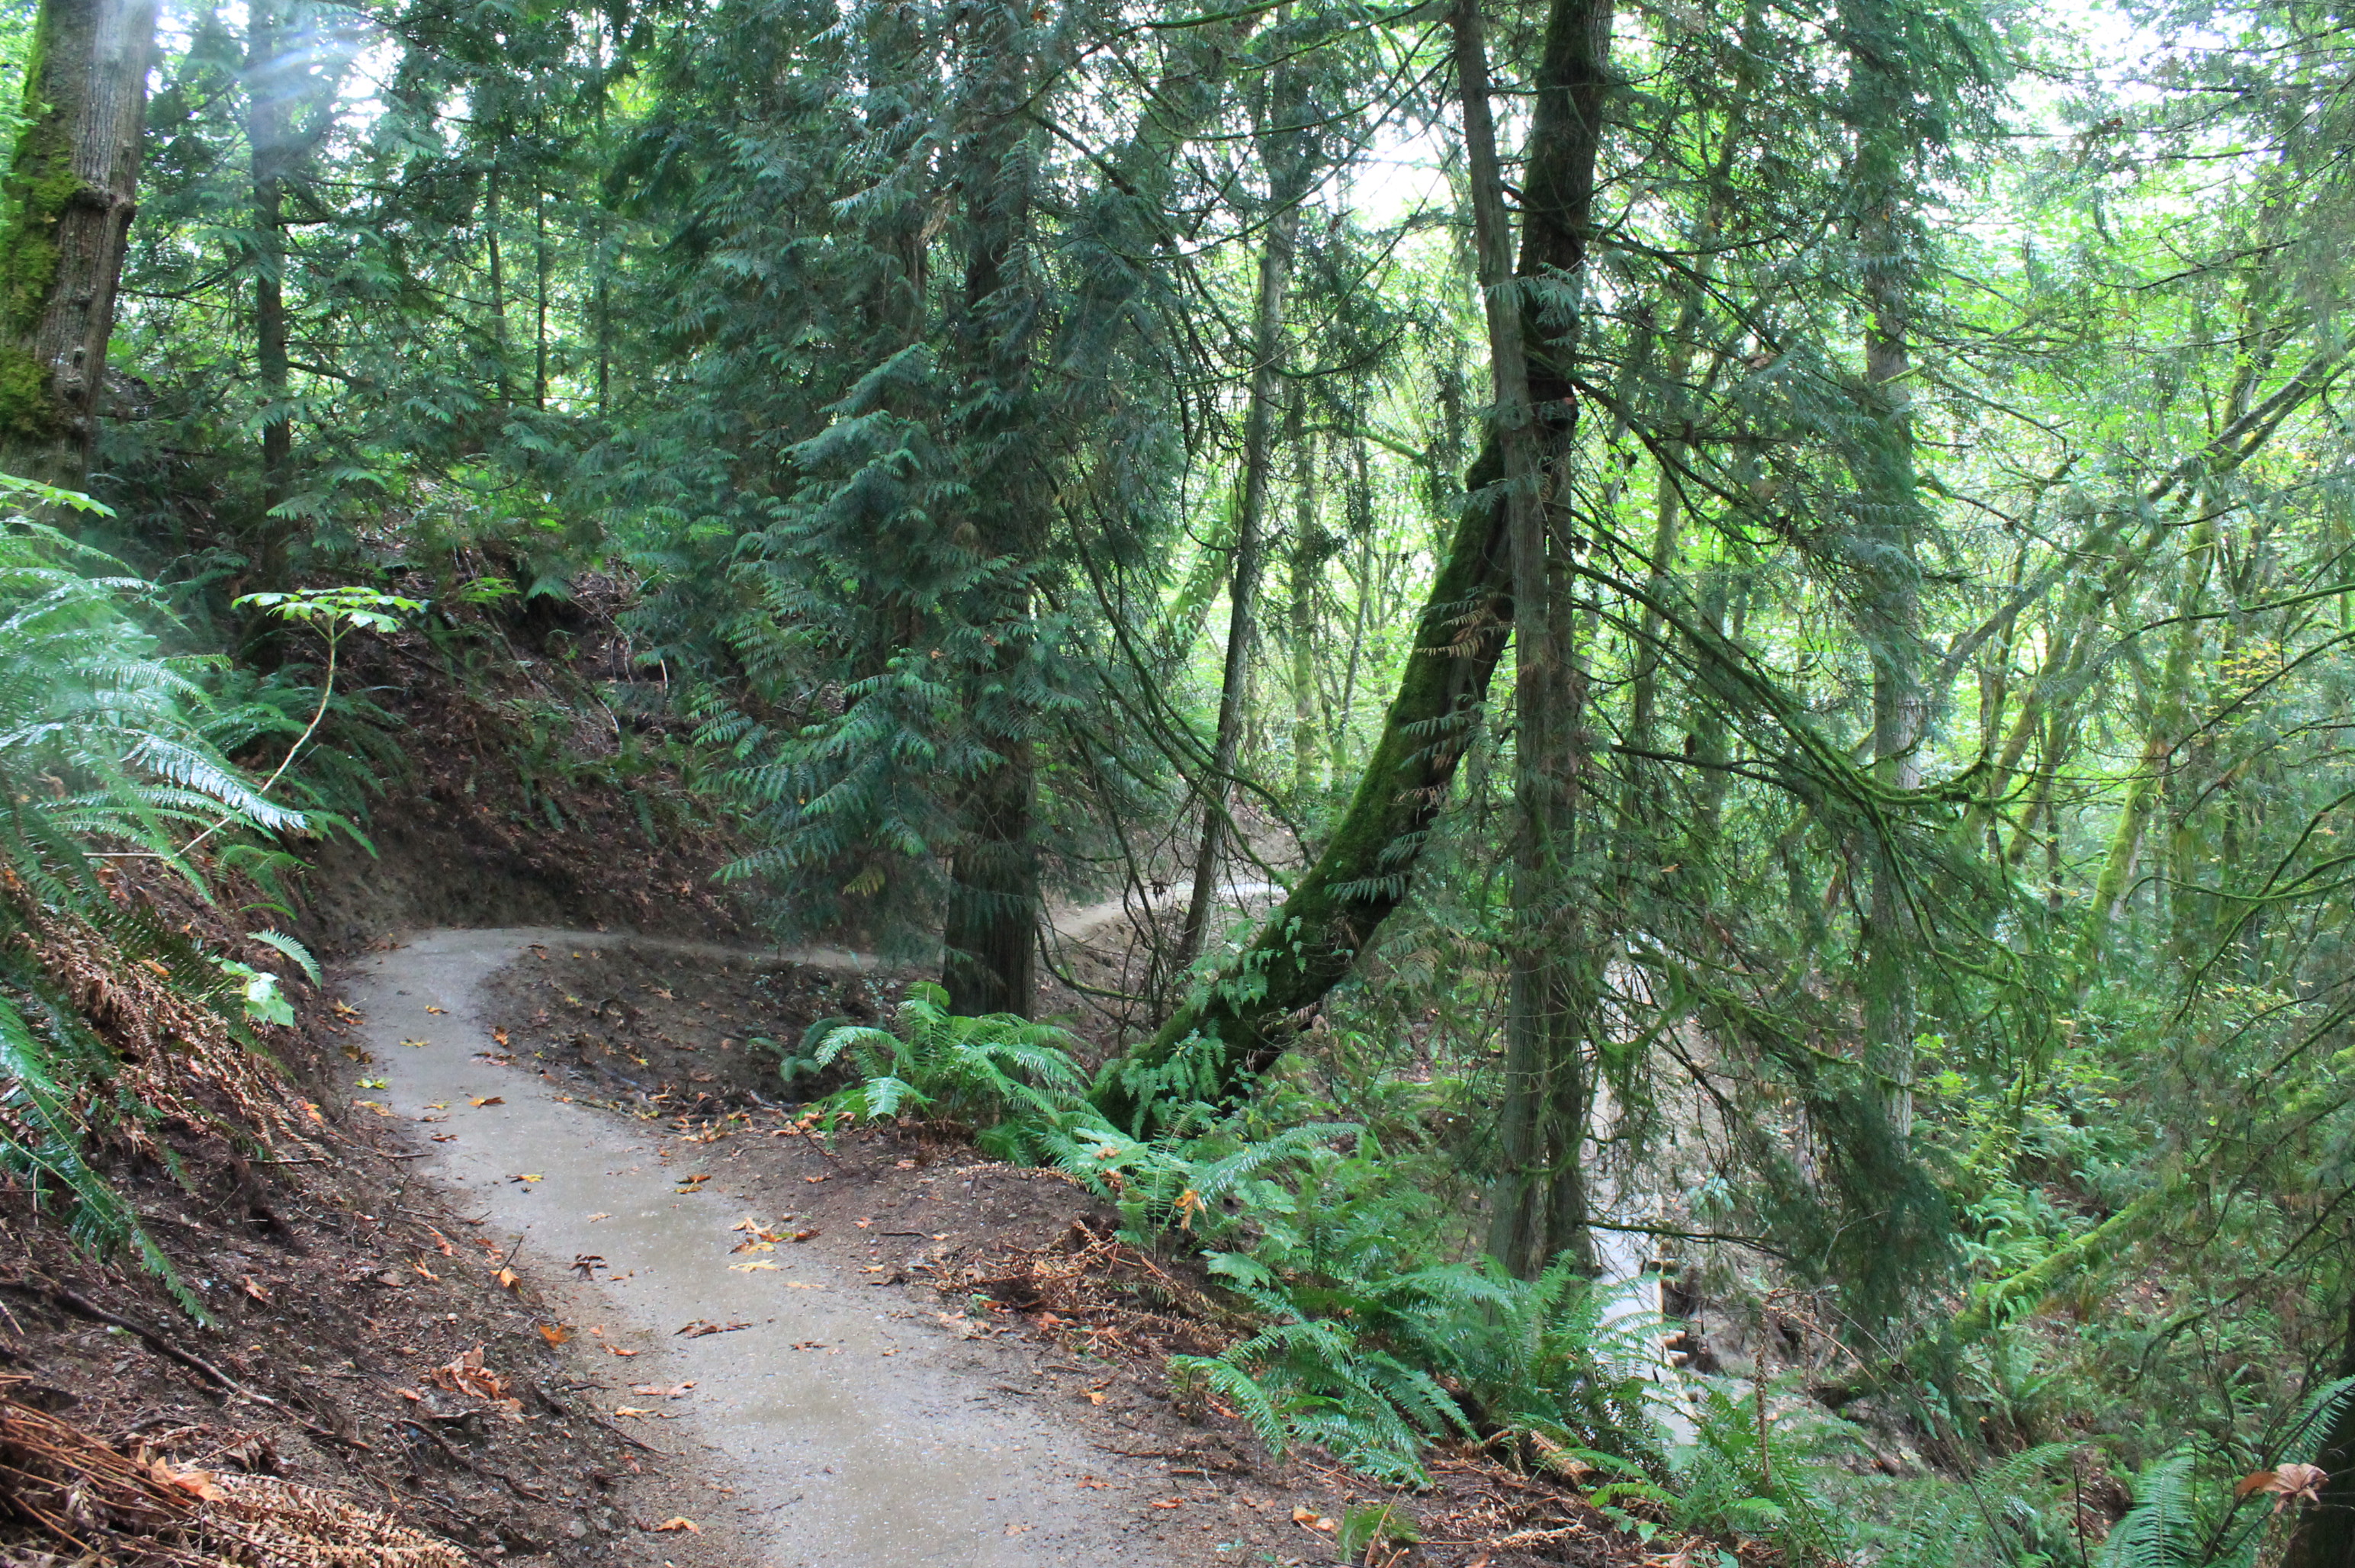 Wooded trail in Evans Creek Preserve. The left side is uphill; the right side is downhill. The trail is lined with both coniferous and deciduous trees, ferns, and other vegetation.